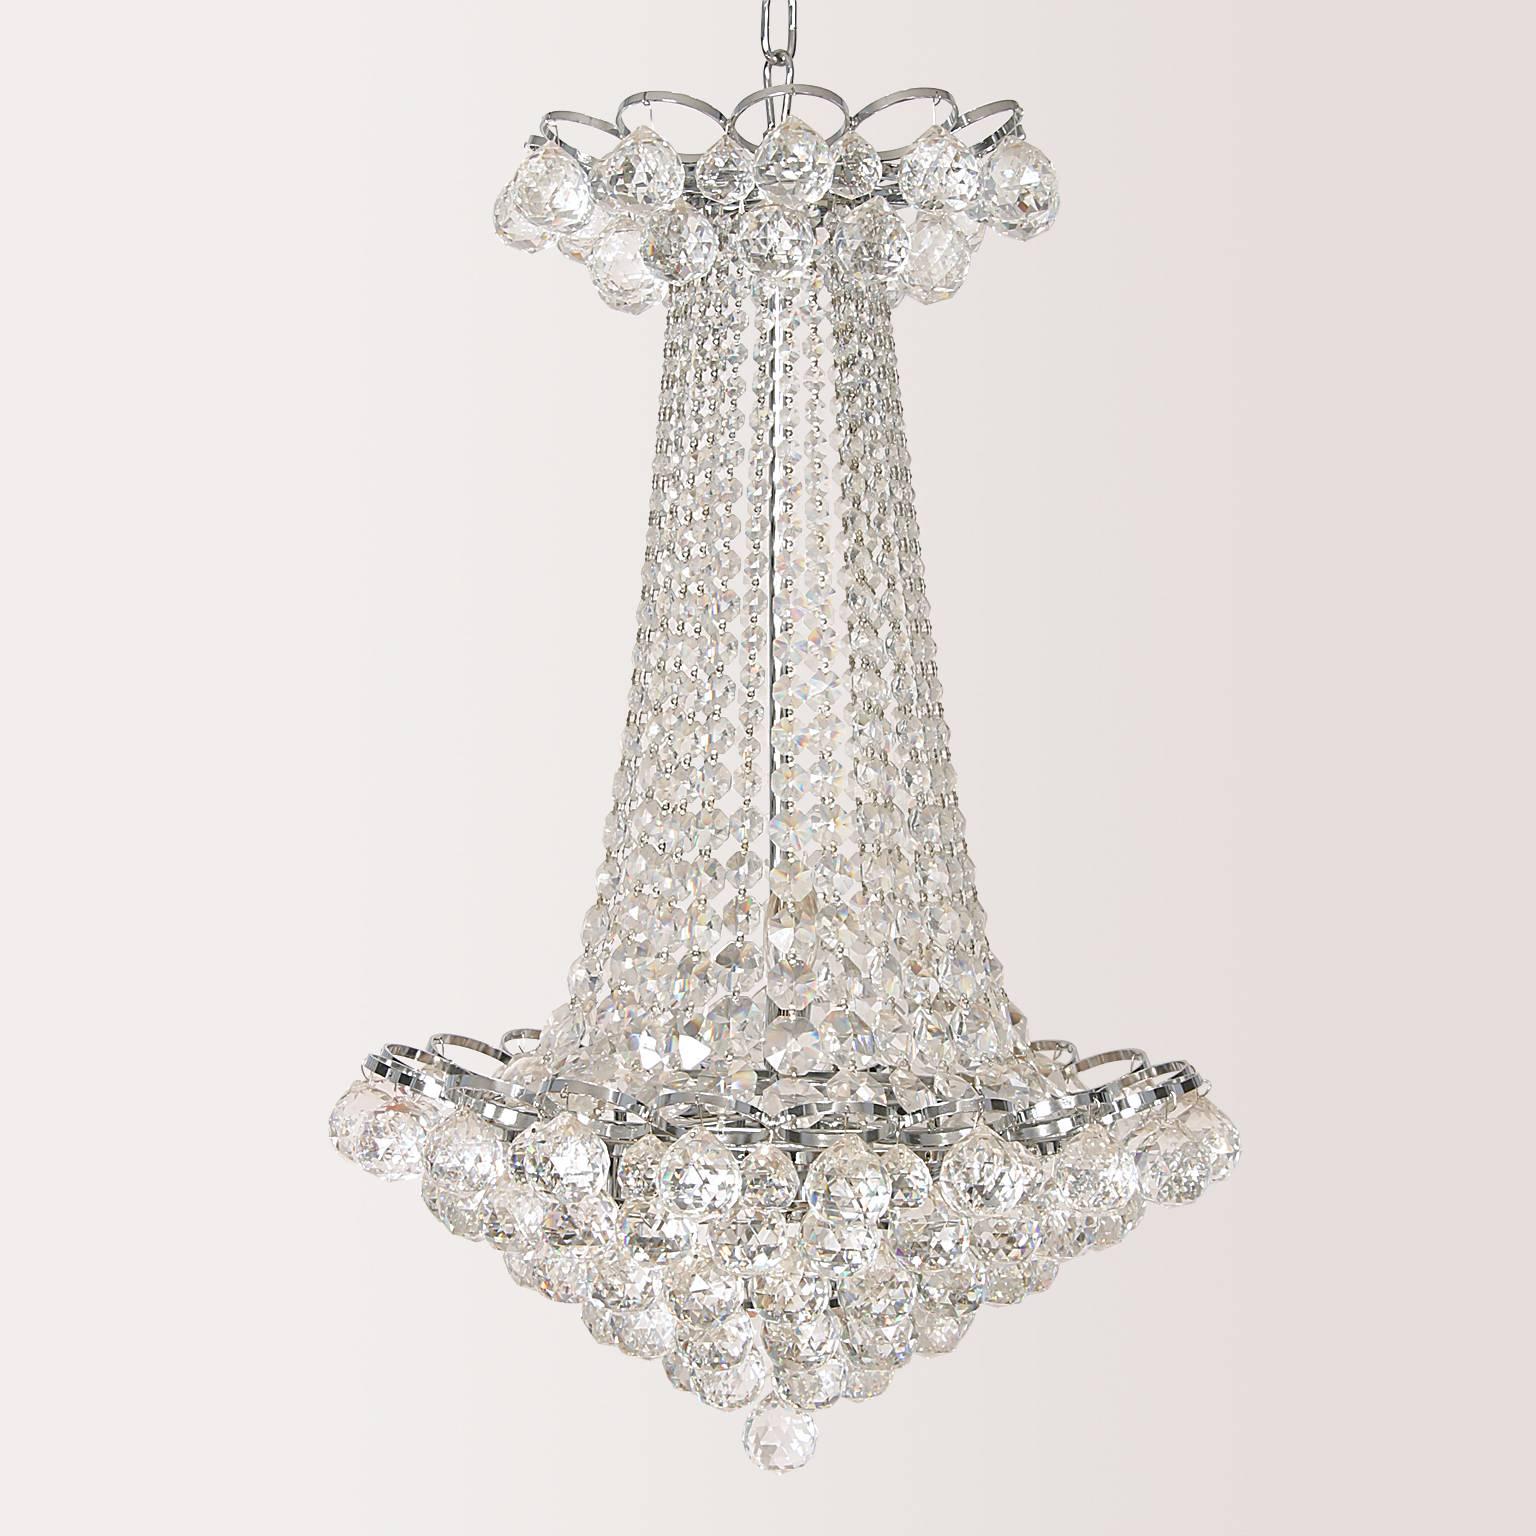 Brilliant cut lead crystal pendant chandelier with six candelabra lights. Cut crystal balls at the top and six-tiered at the bottom with graduating crystal beads cascading from top to bottom ending with the sixth tier of one cut crystal ball.